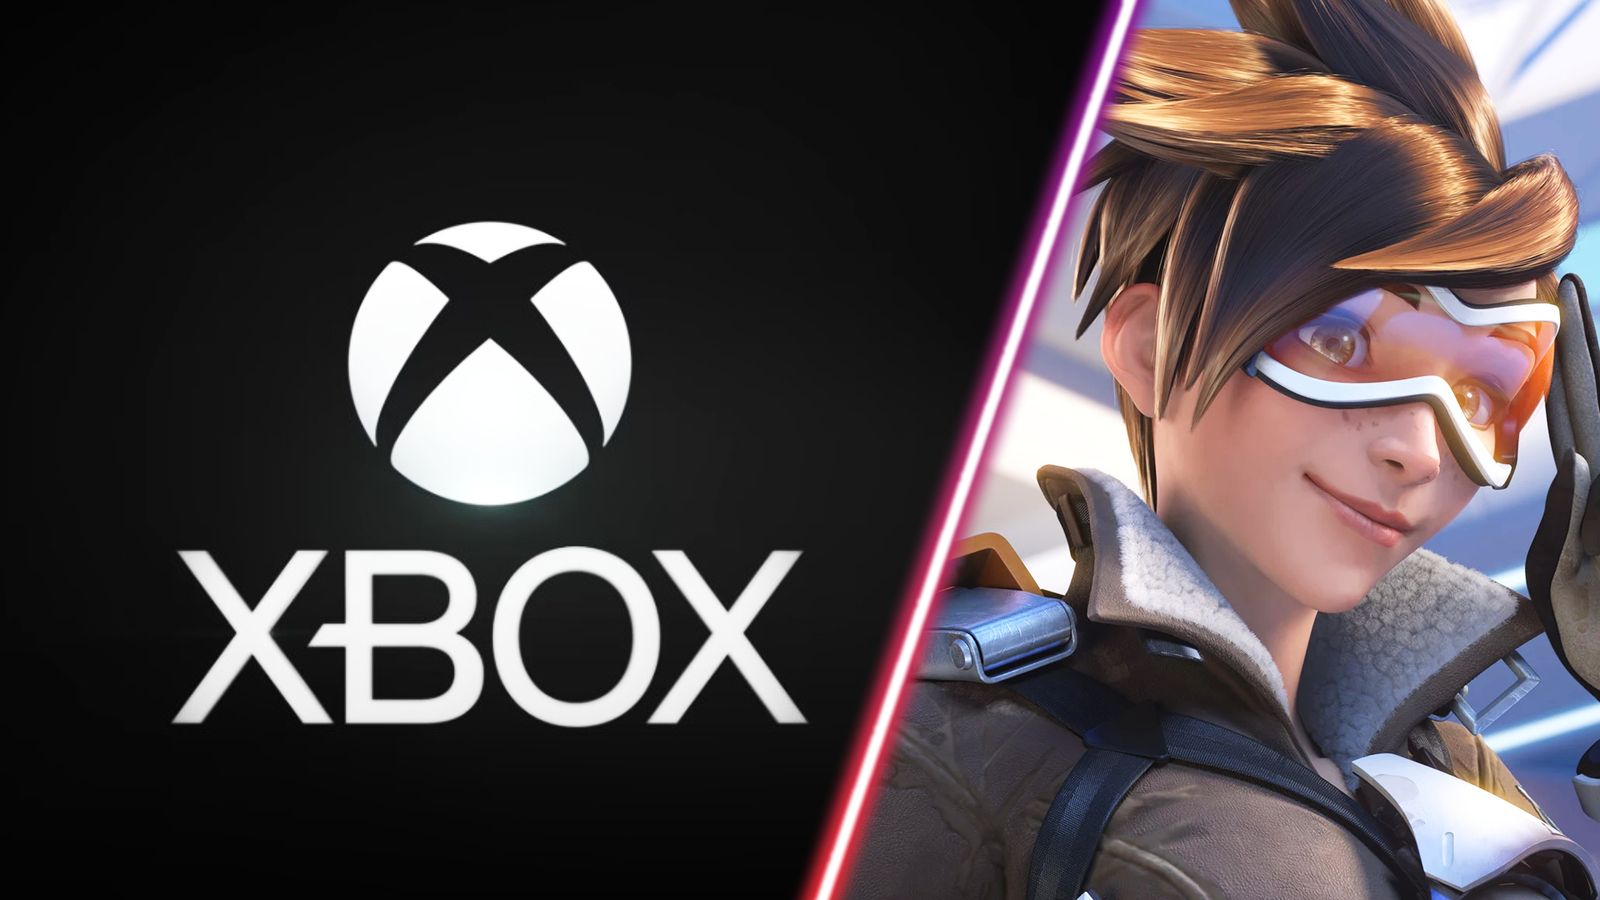 The Xbox logo alongside Overwatch 2's Tracer.